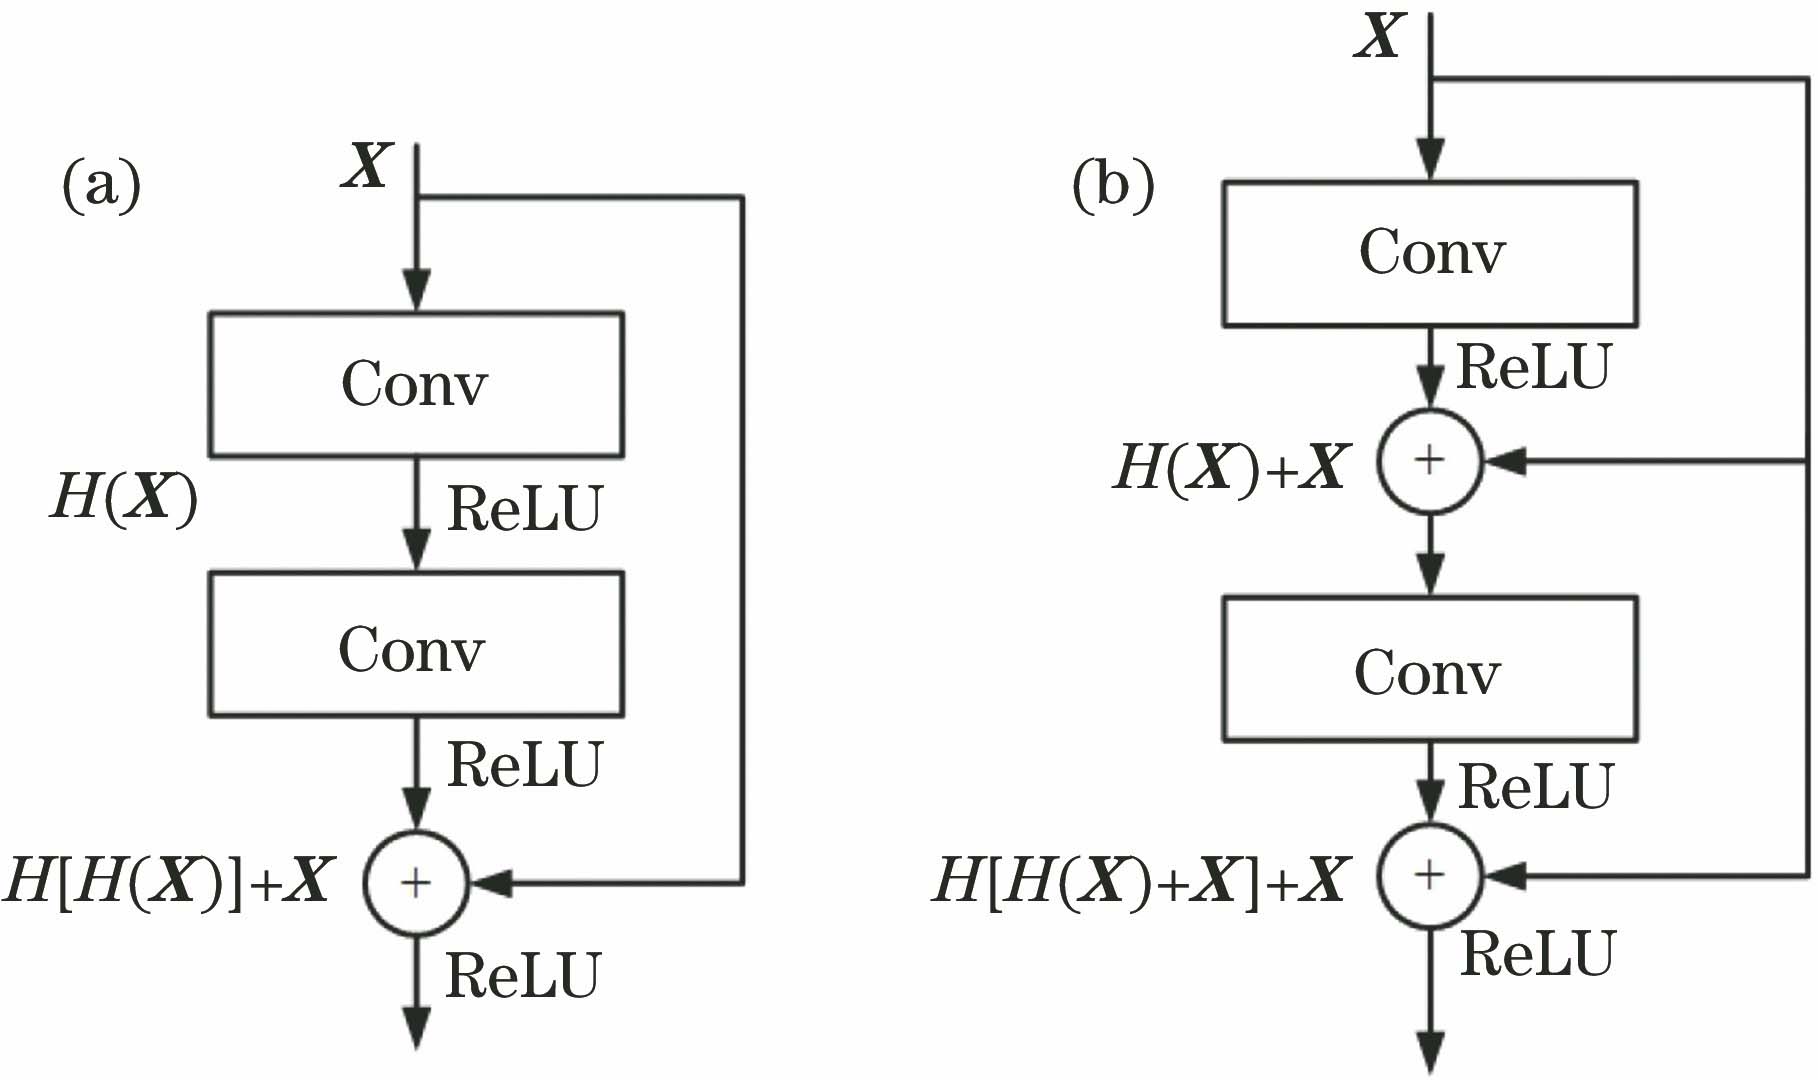 Feature converter residual structure network model. (a) ResNet network model; (b) DenseNet network model